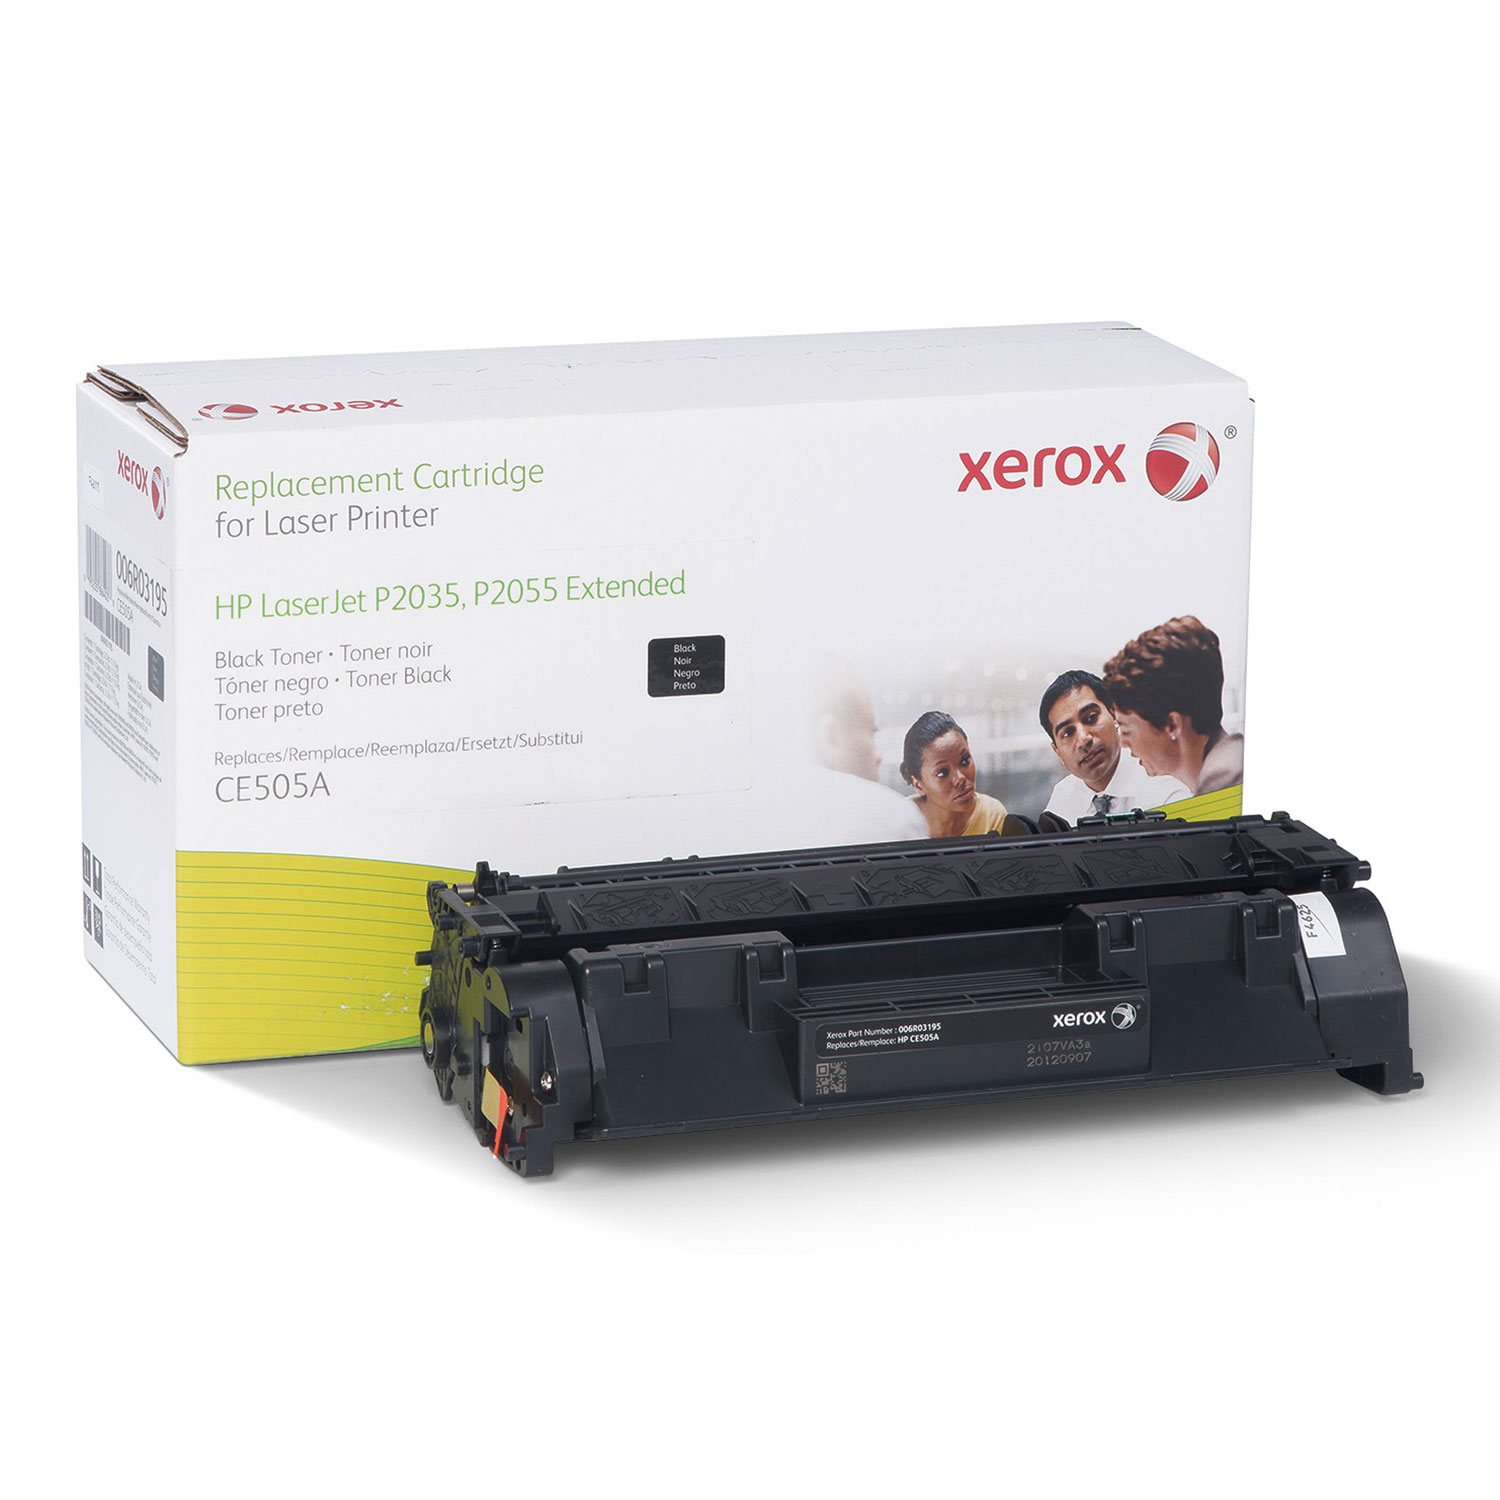  Xerox 006R03195 006R03195 Replacement Extended-Yield Toner for CE505A (05A), Black (XER006R03195) 